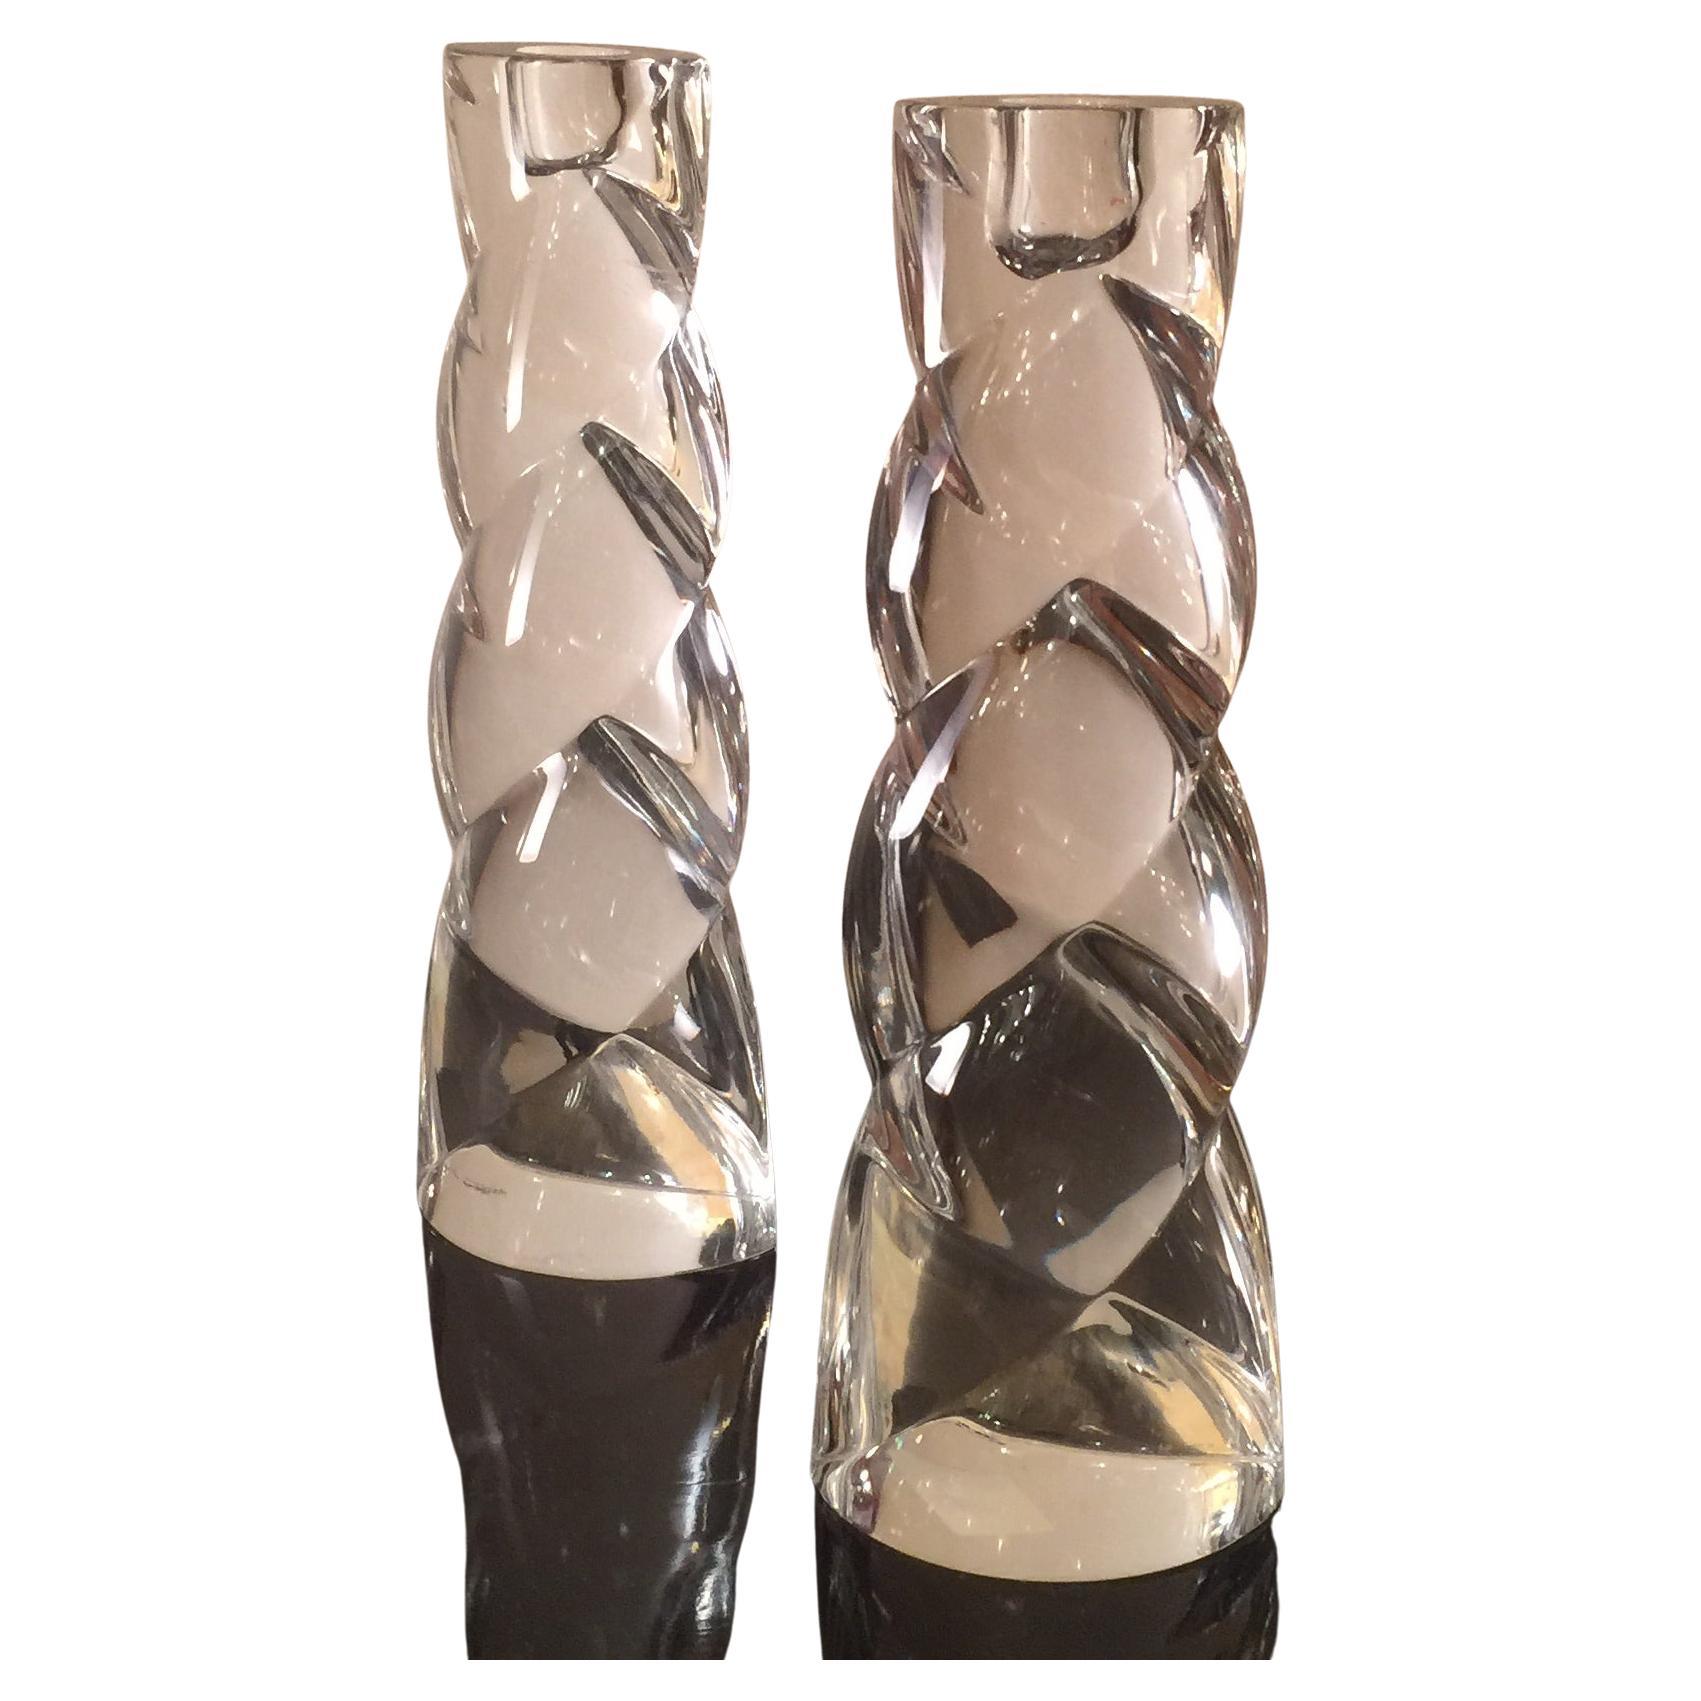 Crystal Pair of Candles, 1930, Sign, Rogaska 'Slovenia' For Sale